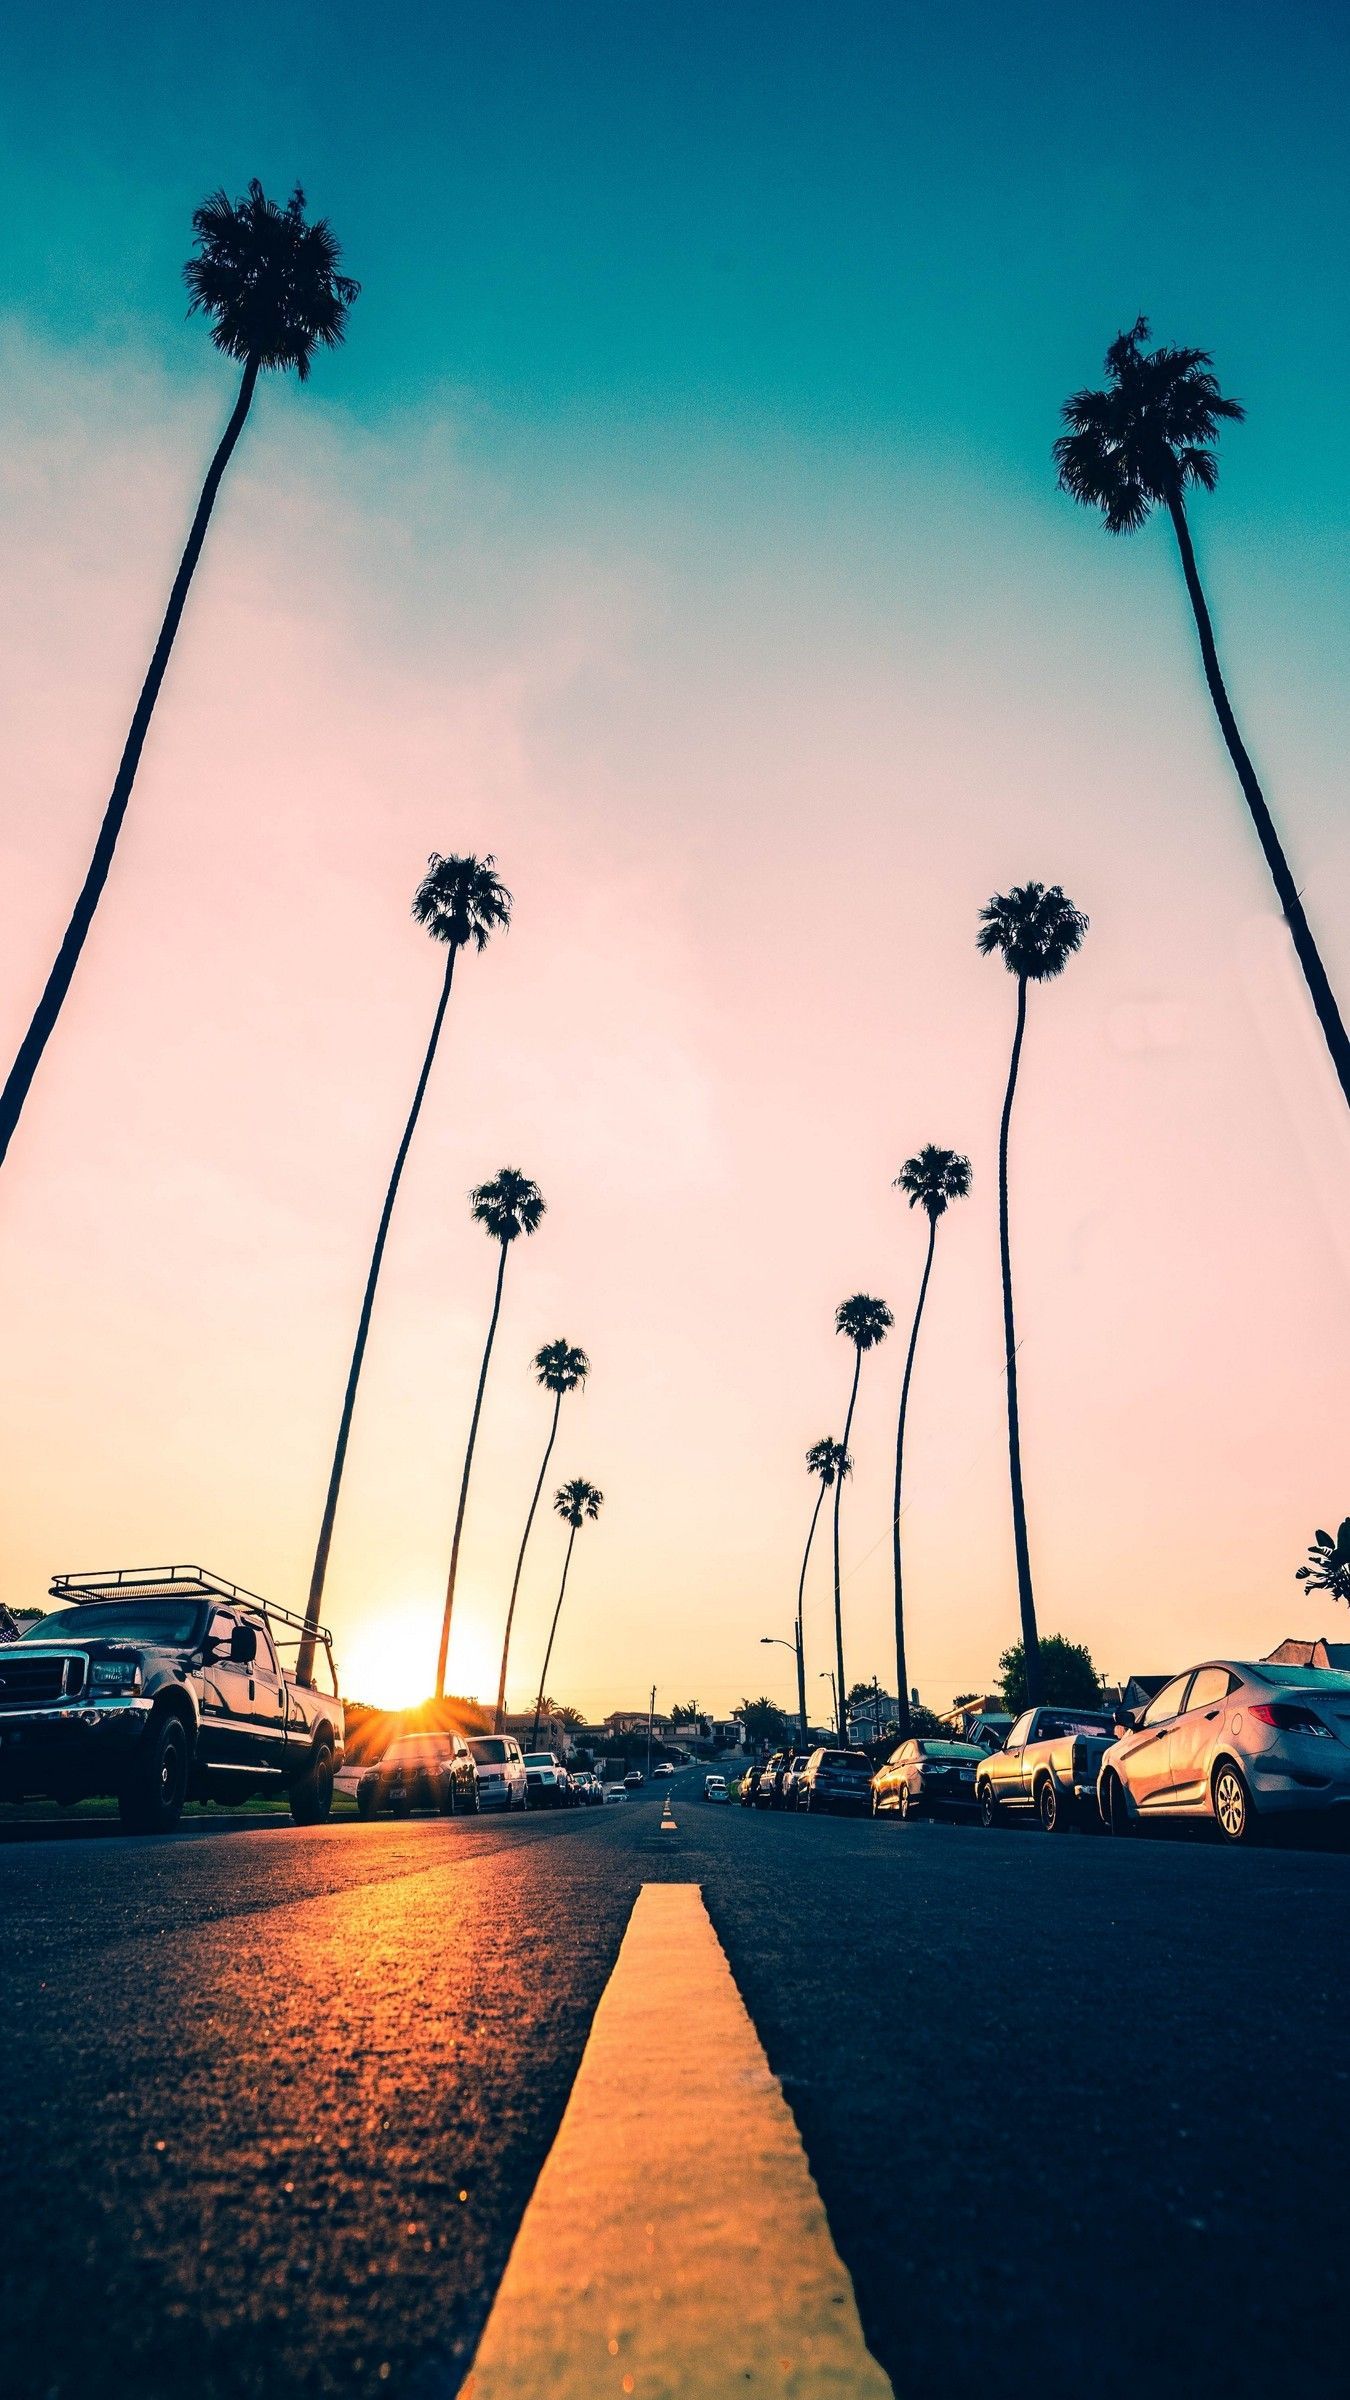 A city street lined with palm trees during a sunset - Palm tree